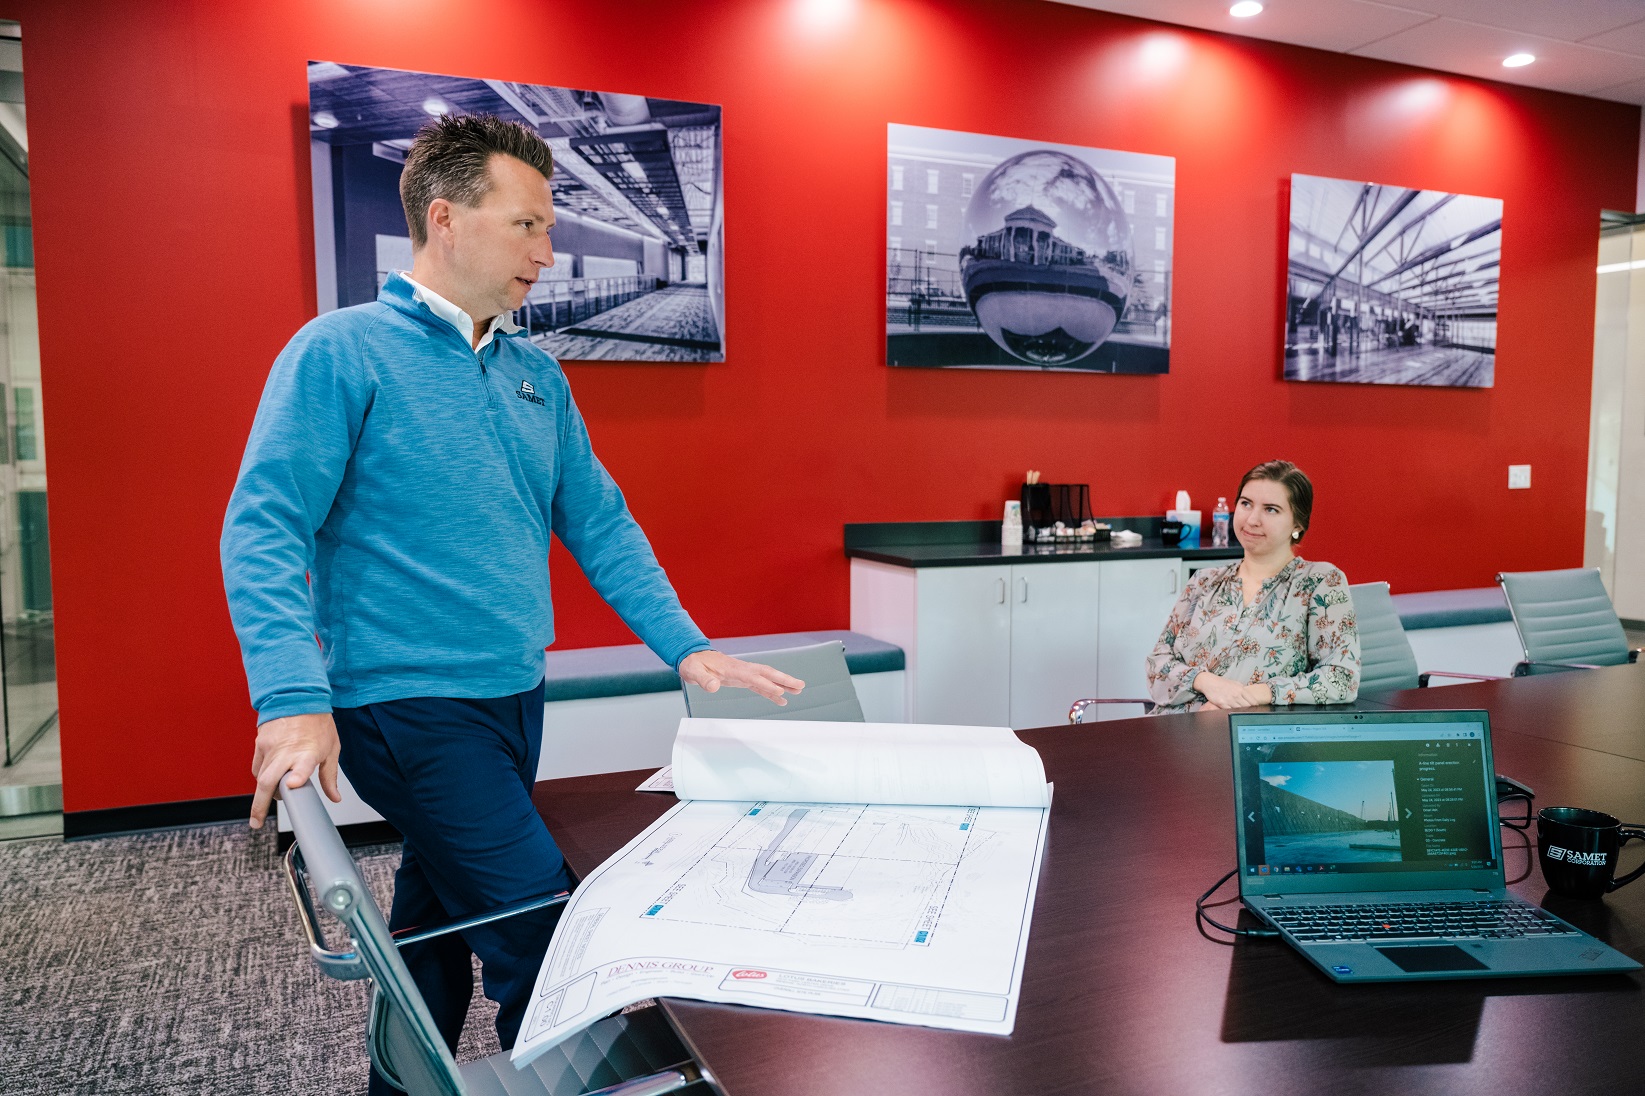 Alumnus Brian Hall in conference room with employee and construction drawings.